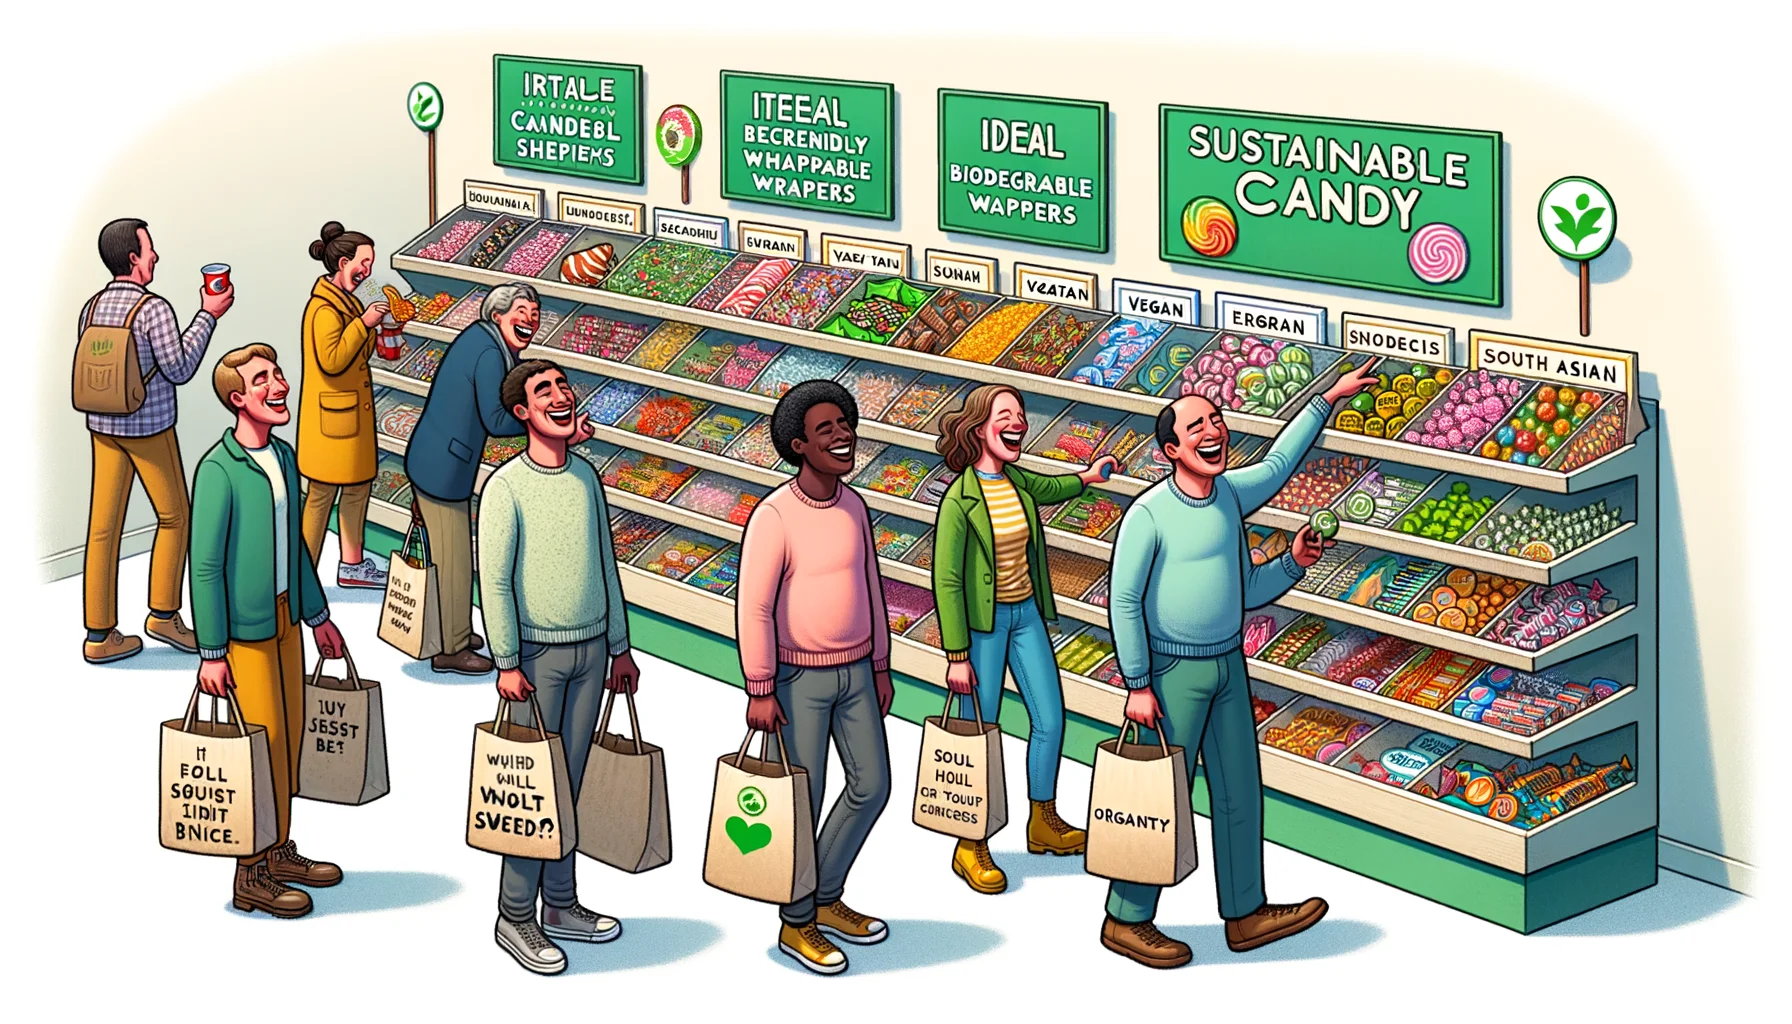 Visualize a humorous and realistic illustration that illustrates ideal 'Sustainable Candy Shopping Options'. This could include a range of eco-friendly candy options on the shelves like biodegradable wrappers, vegan sweets, and candies made from organic ingredients. Shoppers, each person of differing ethnicity such as Caucasian, African, and South Asian, male, female and non-binary are laughing and jesting while marveling at the candy varieties. They fill their reusable bags with candies, and the shopkeeper is also finding the entire scene amusing. Integrated within the image are funny signs that carry sharp-witted eco-puns related to sustainability and candy.